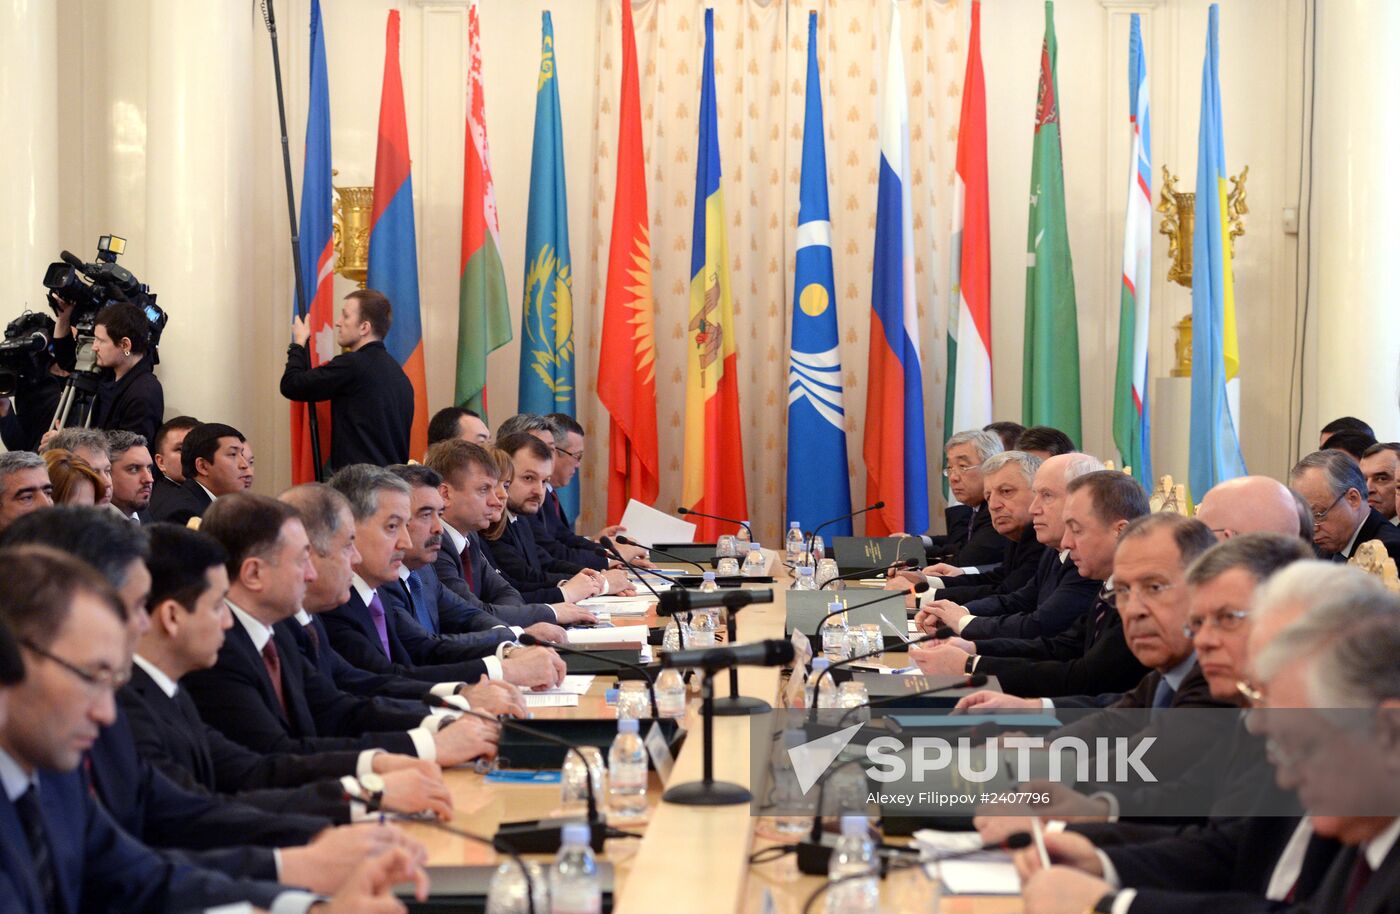 CIS Foreign Ministers Council meeting